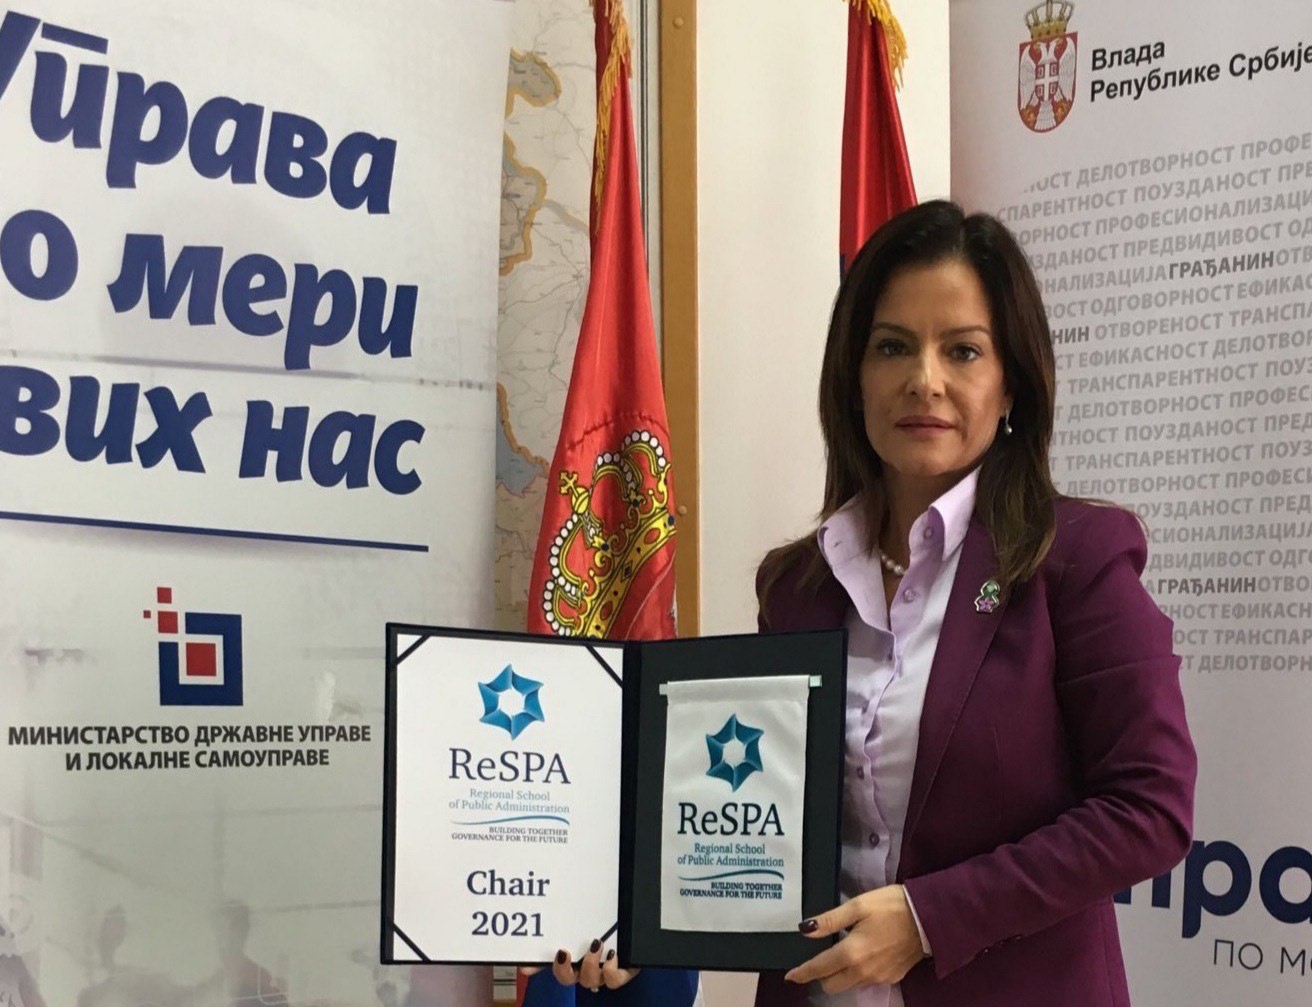 THE REPUBLIC OF SERBIA HAS TAKEN OVER THE PRESIDENCY OF RESPA